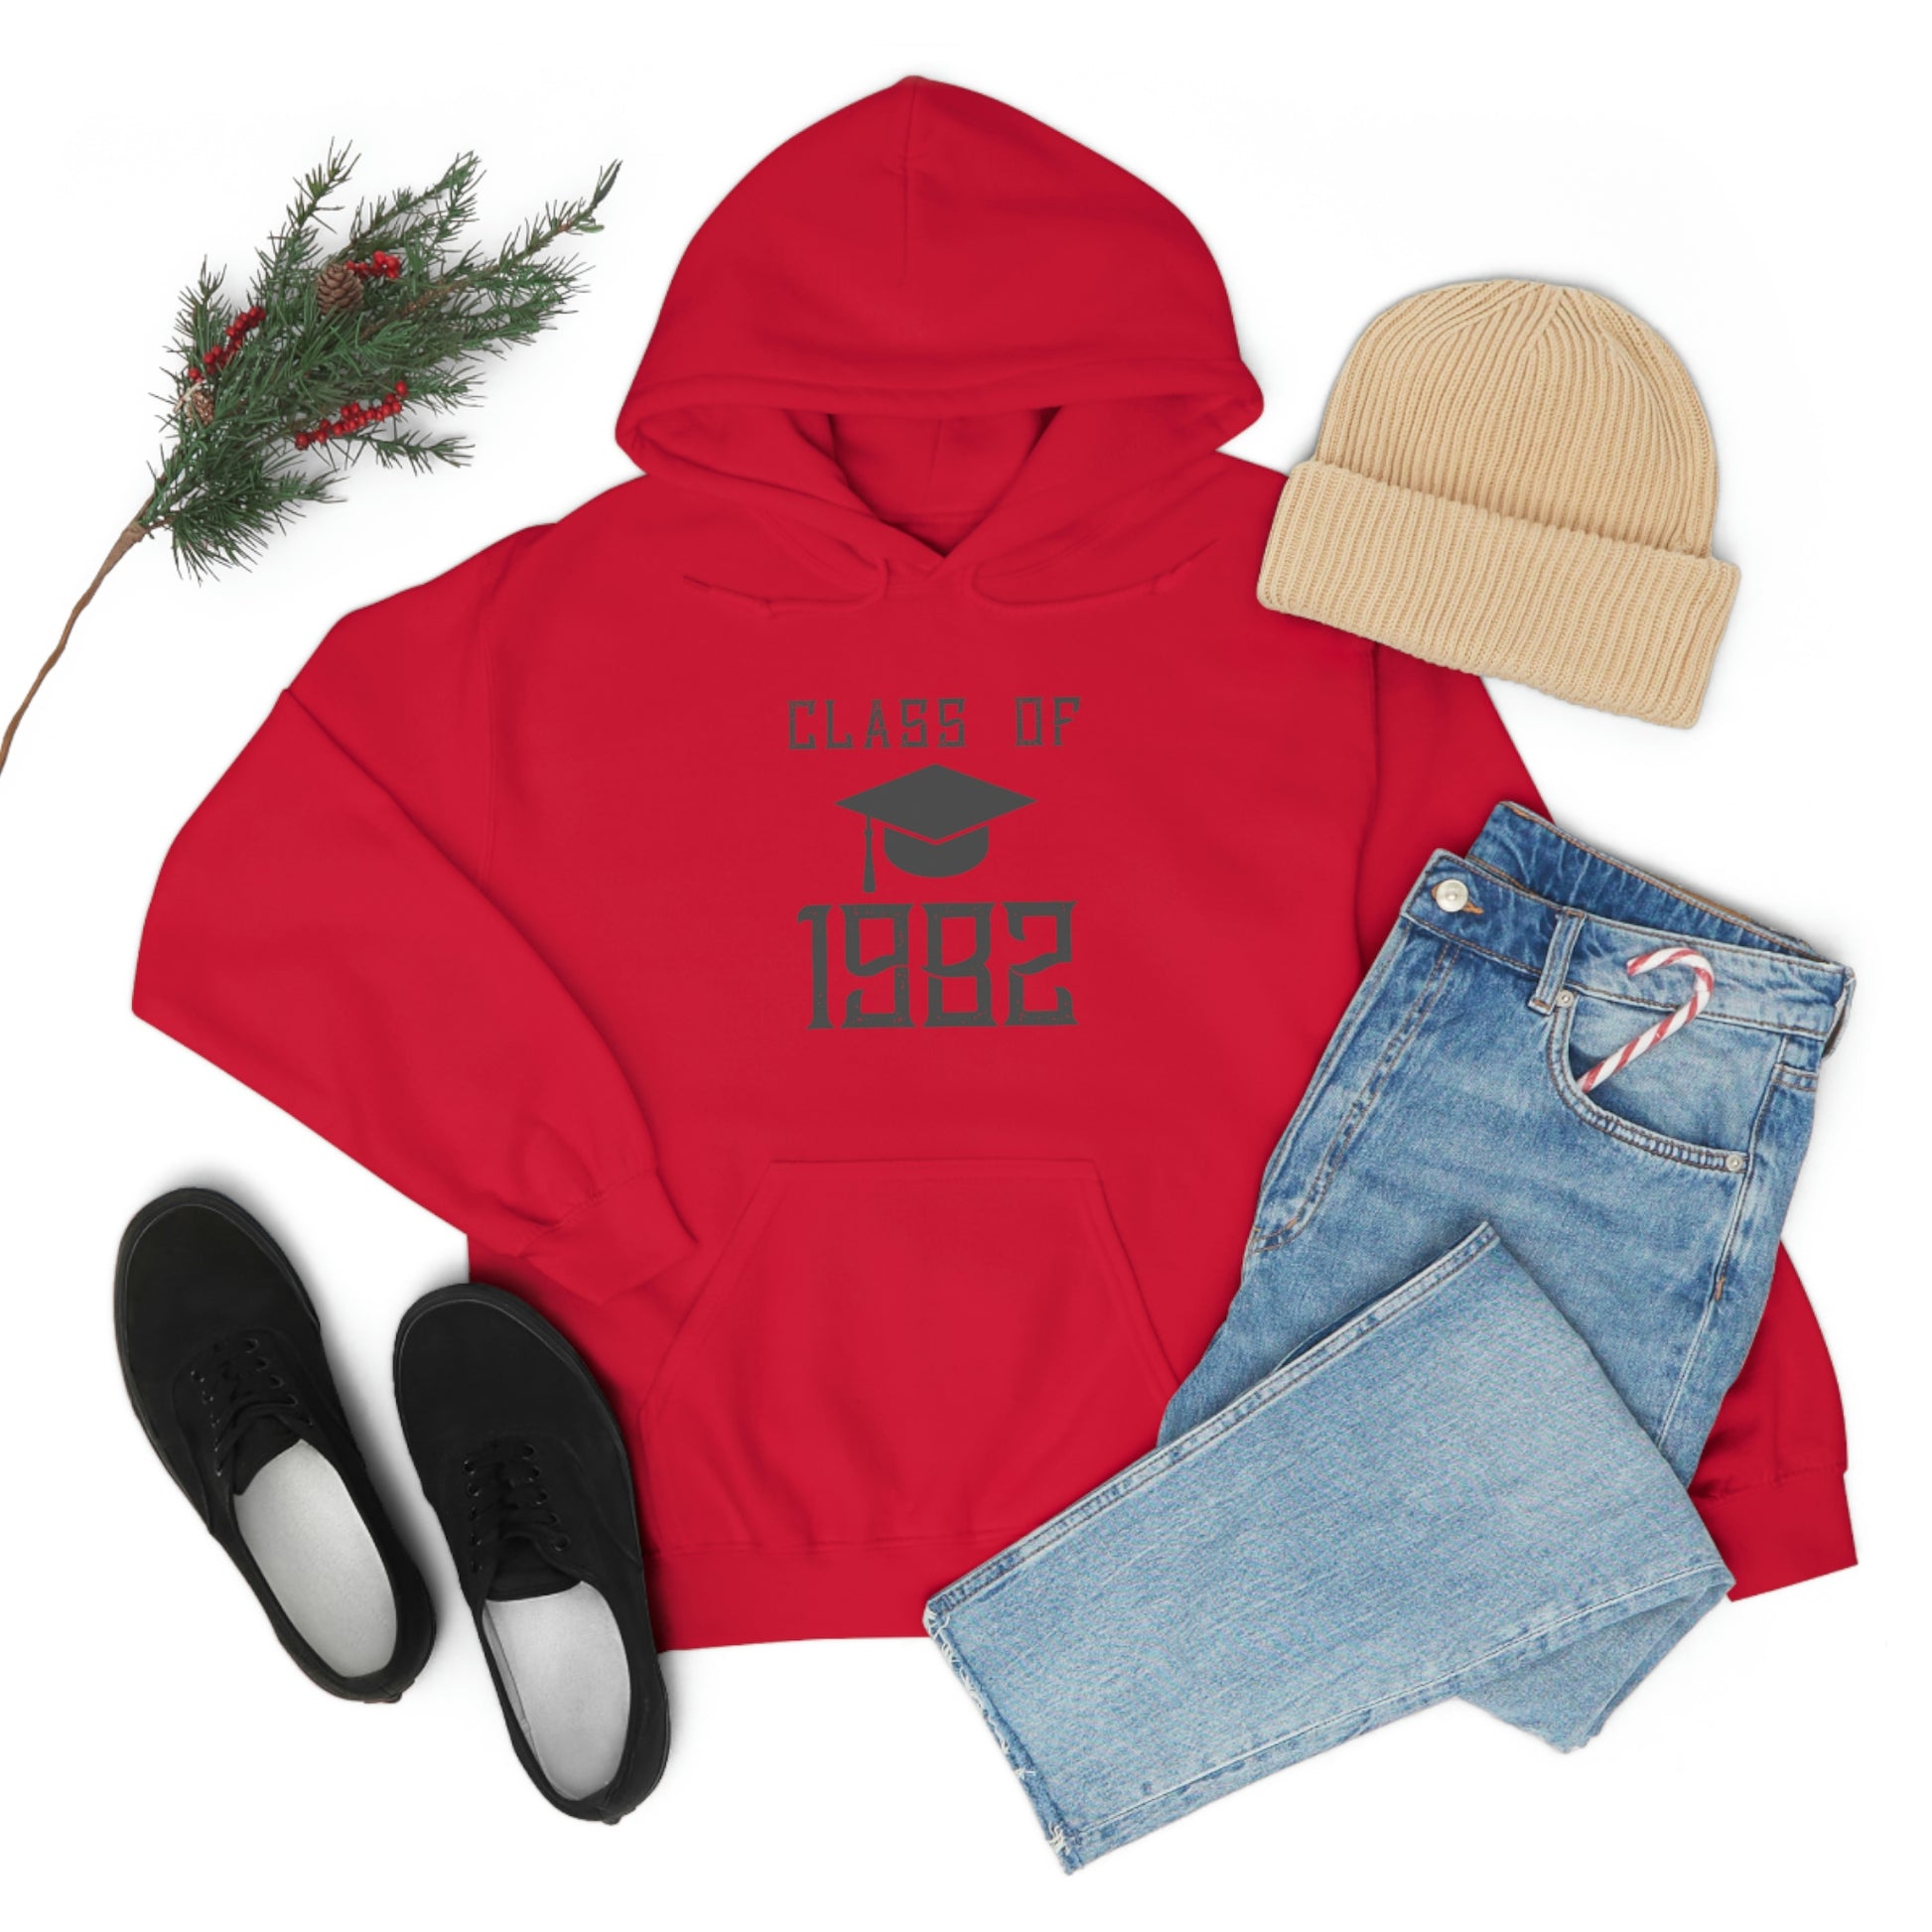 "Class Of 1982" Hoodie - Weave Got Gifts - Unique Gifts You Won’t Find Anywhere Else!